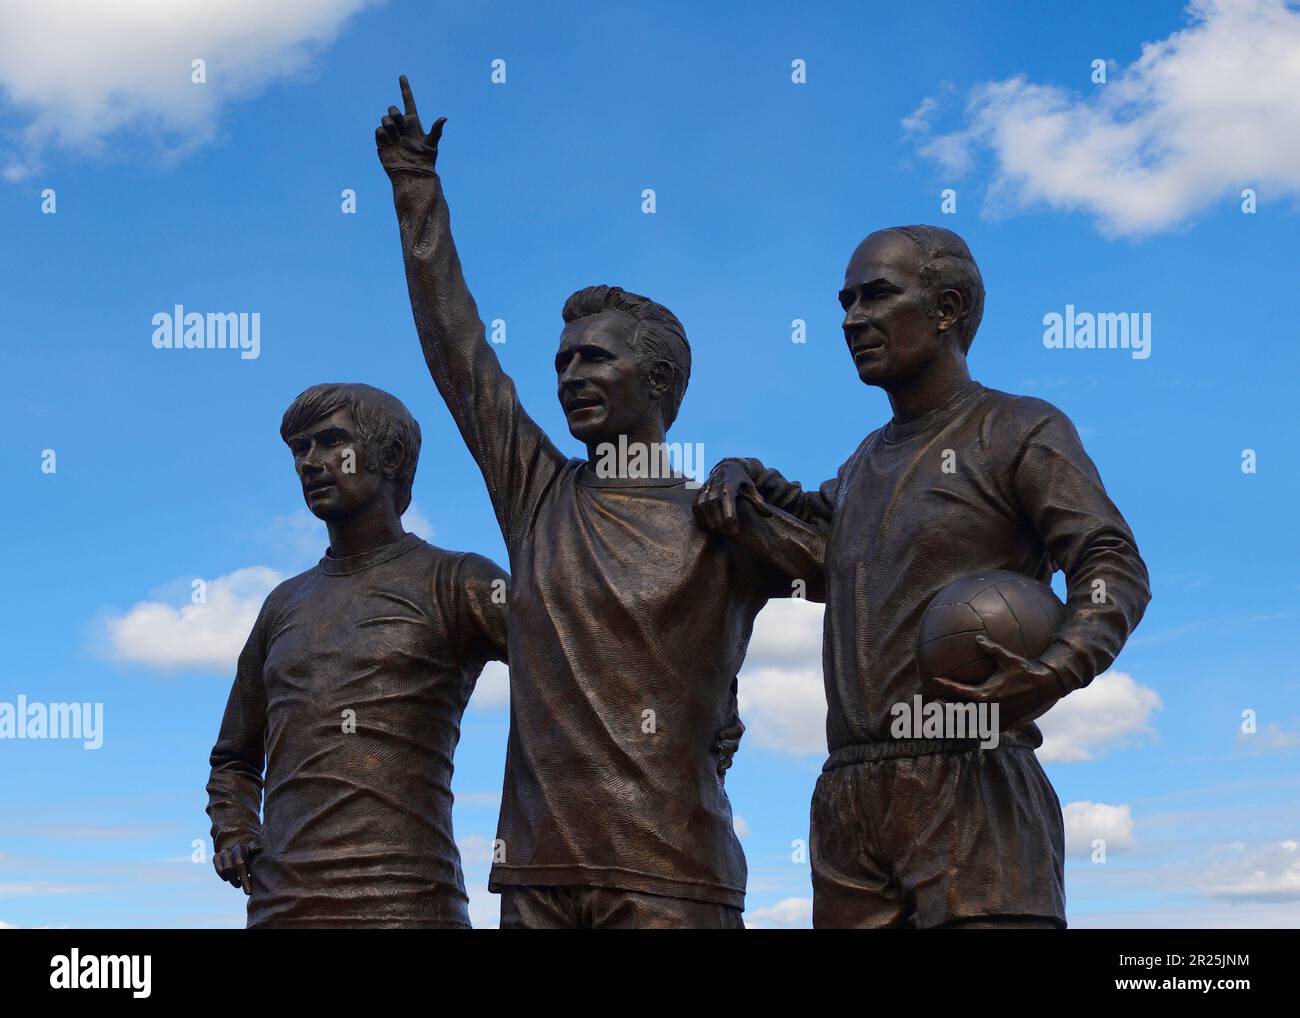 Holy Trinity Statue outside the Manchester United's Stadium, Old Trafford, Manchester, United Kingdom Stock Photo